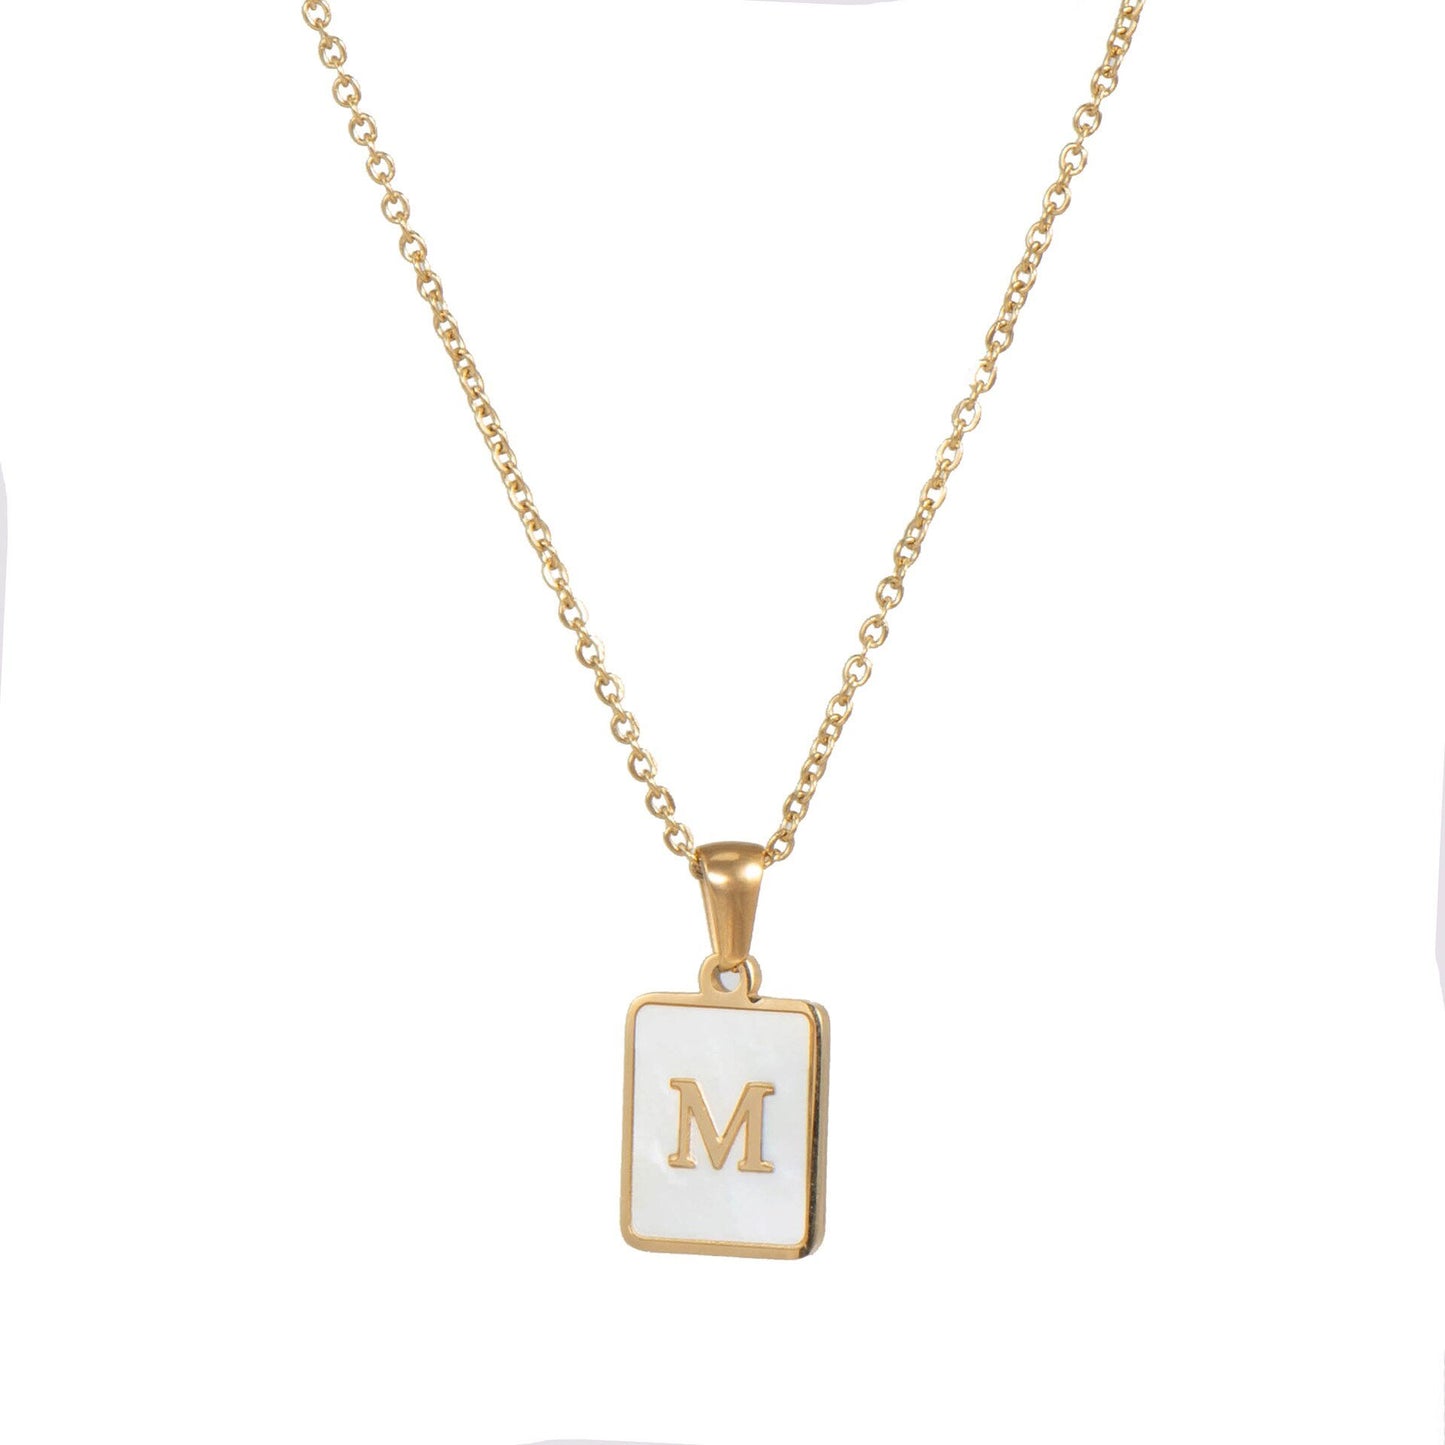 Gold Mother of Pearl Monogram Necklace, Letter M.